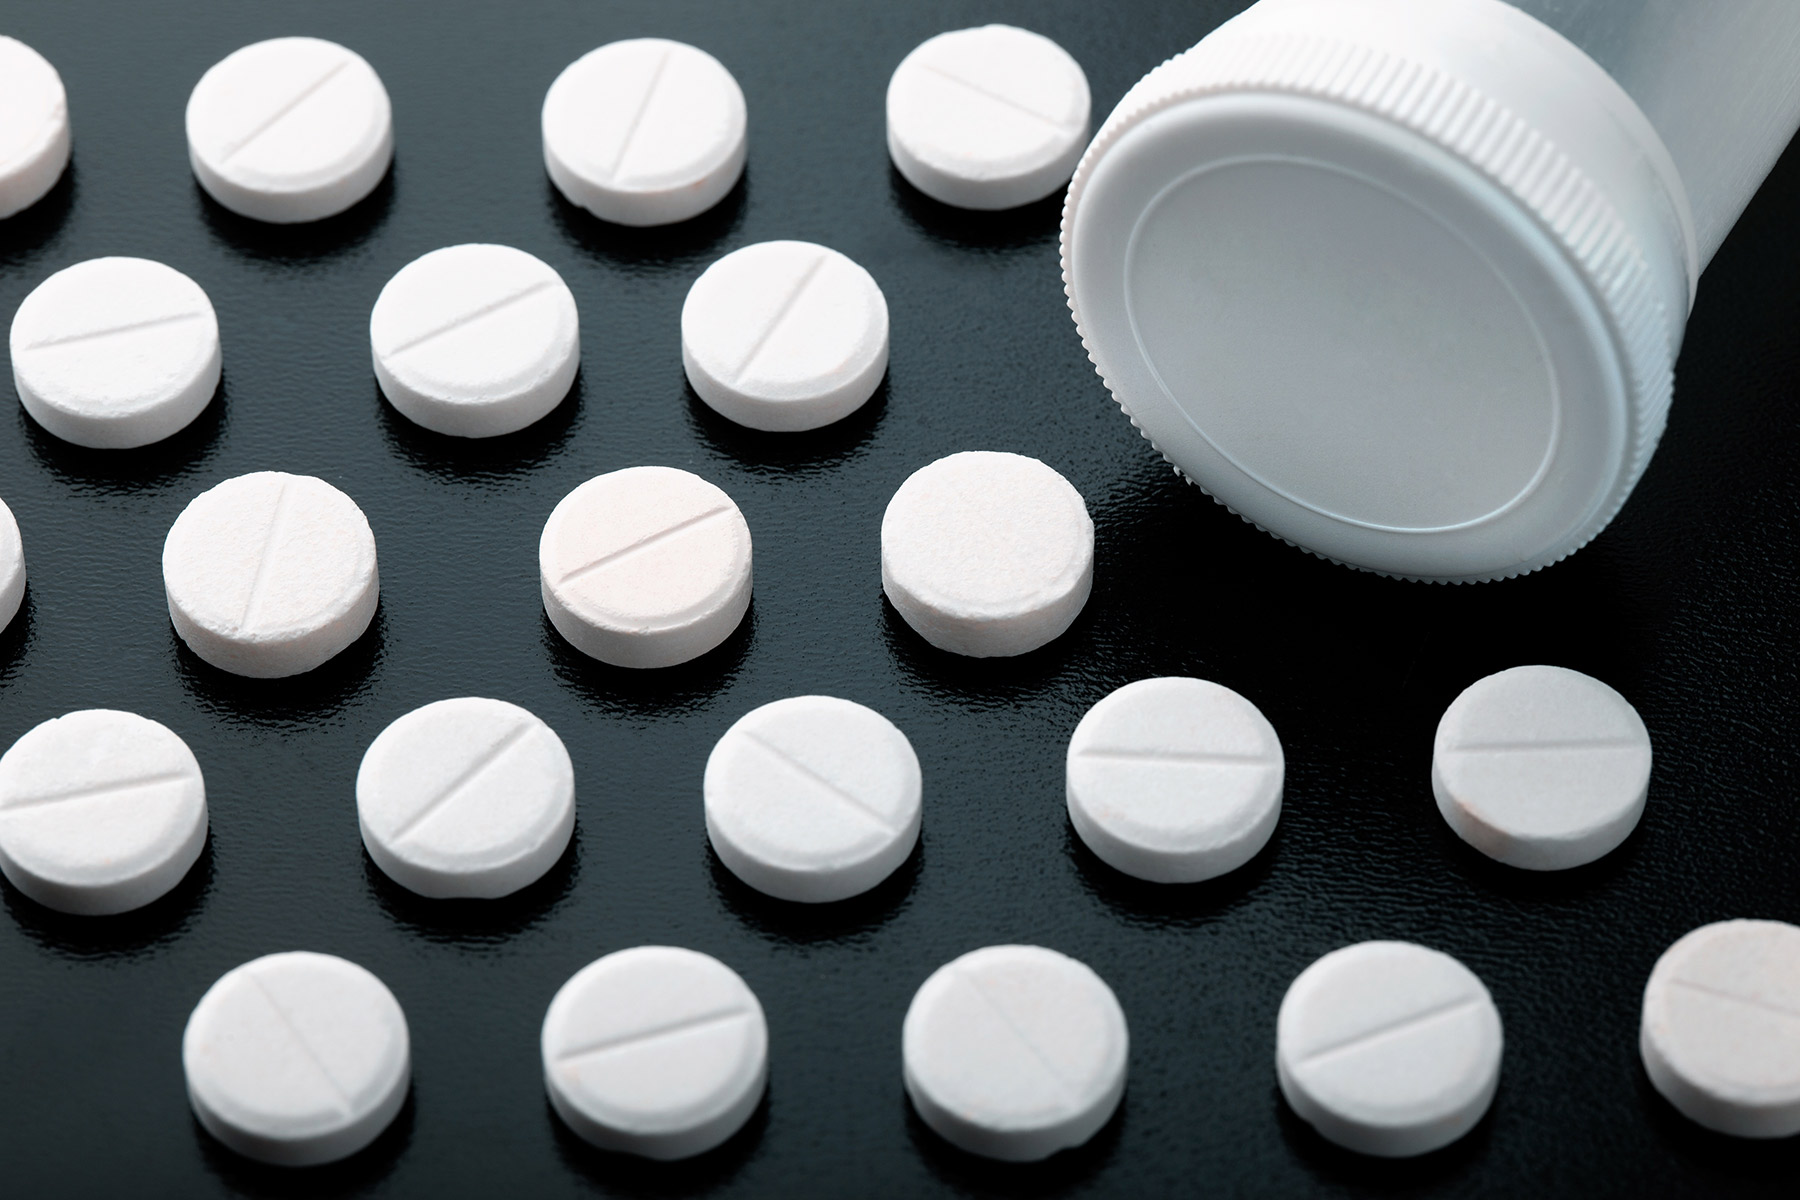 Judge Orders Extended Lawsuit Protection to Pharma Family - American Legal News